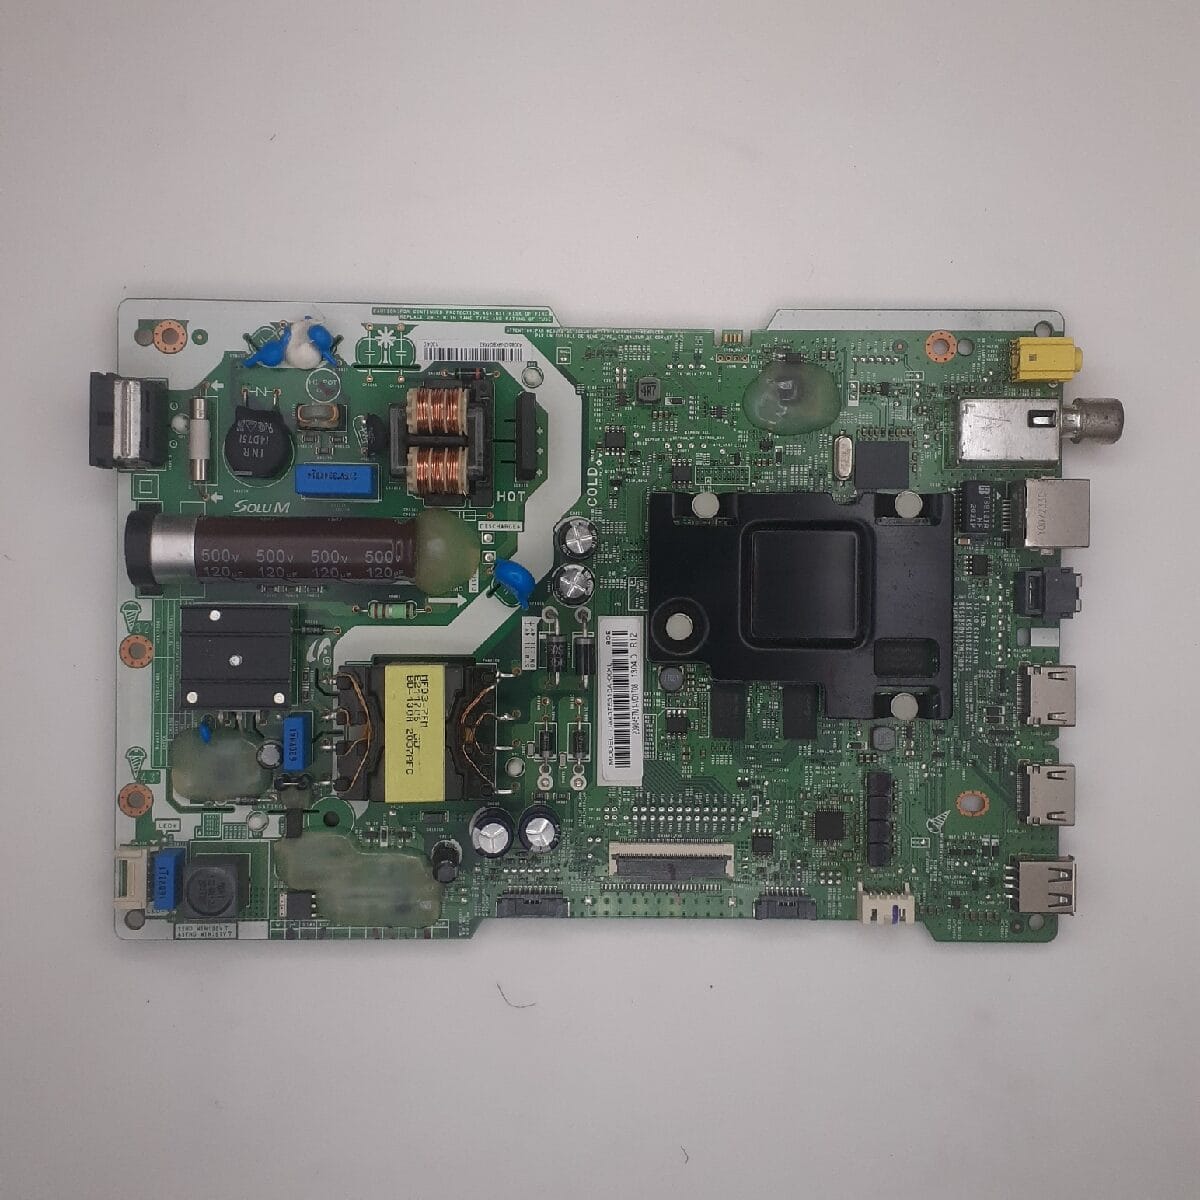 UA43T5310AKXXL SAMSUNG MOTHERBOARD FOR LED TV